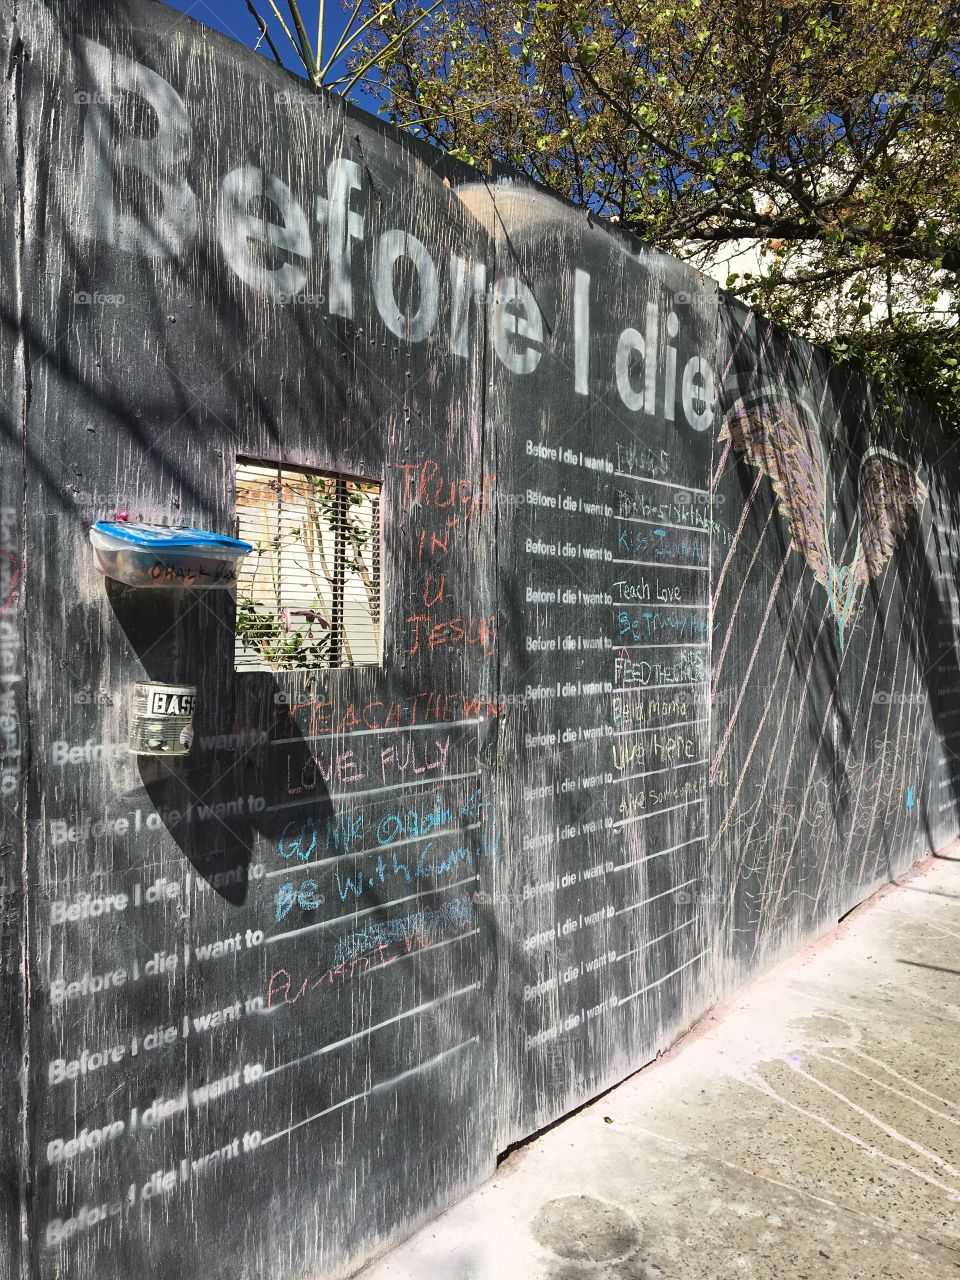 Before I die I want to wall in downtown Asheville NC. People can write what they want to do in a public bucket list